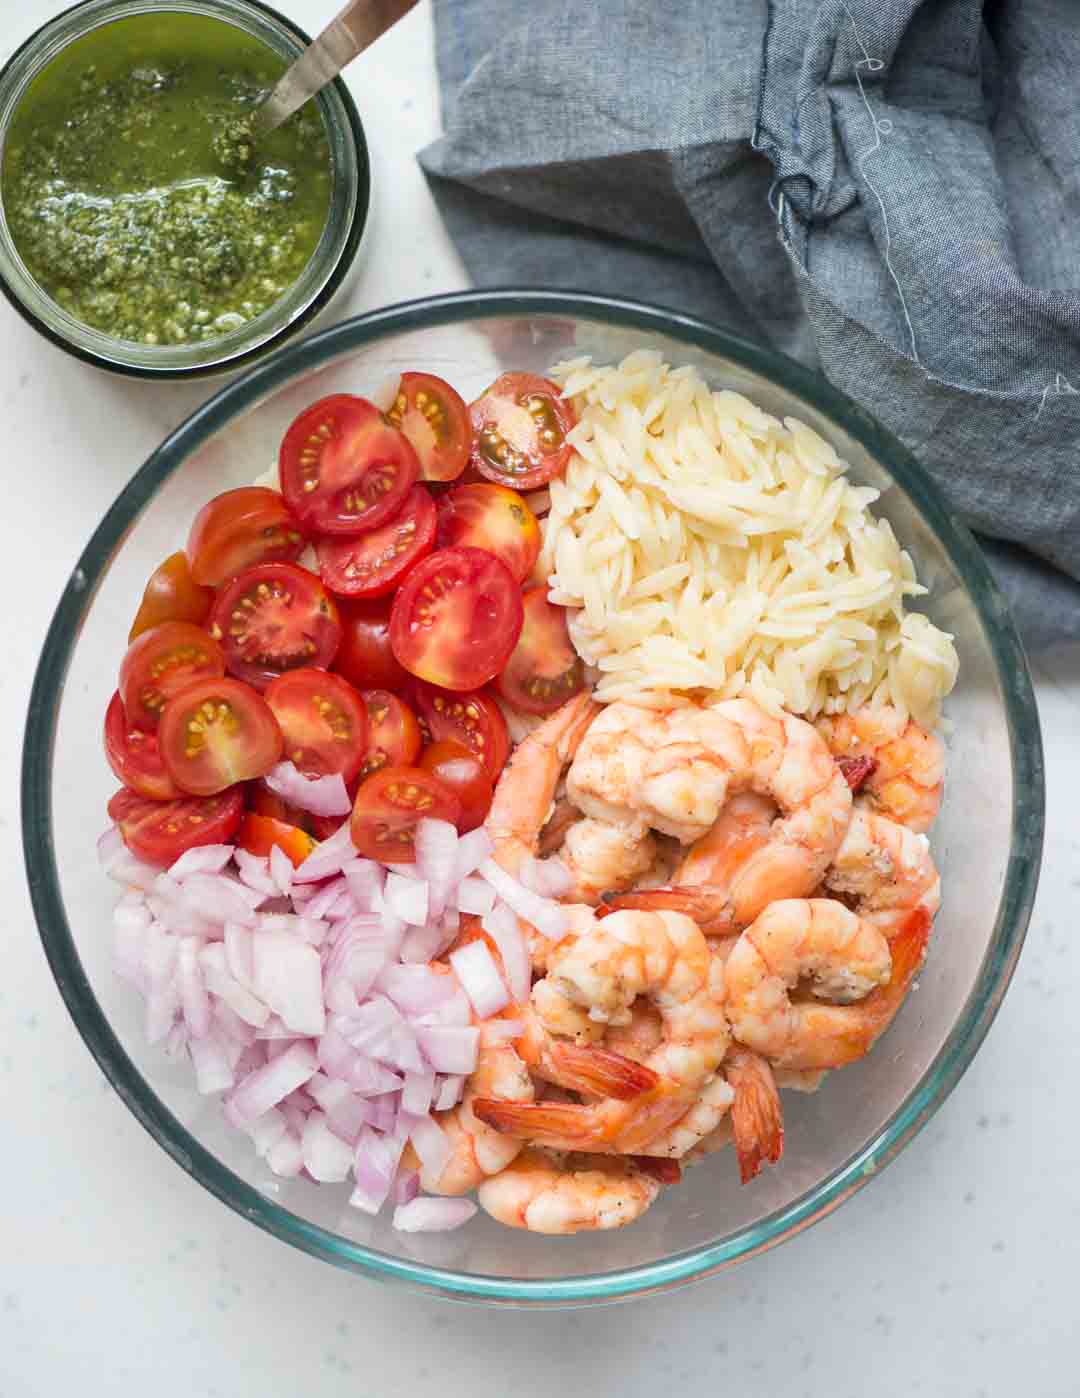 Toss orzo pasta, cherry tomatoes, Chopped onion, shrimp in basil pesto, for a refreshing summer salad